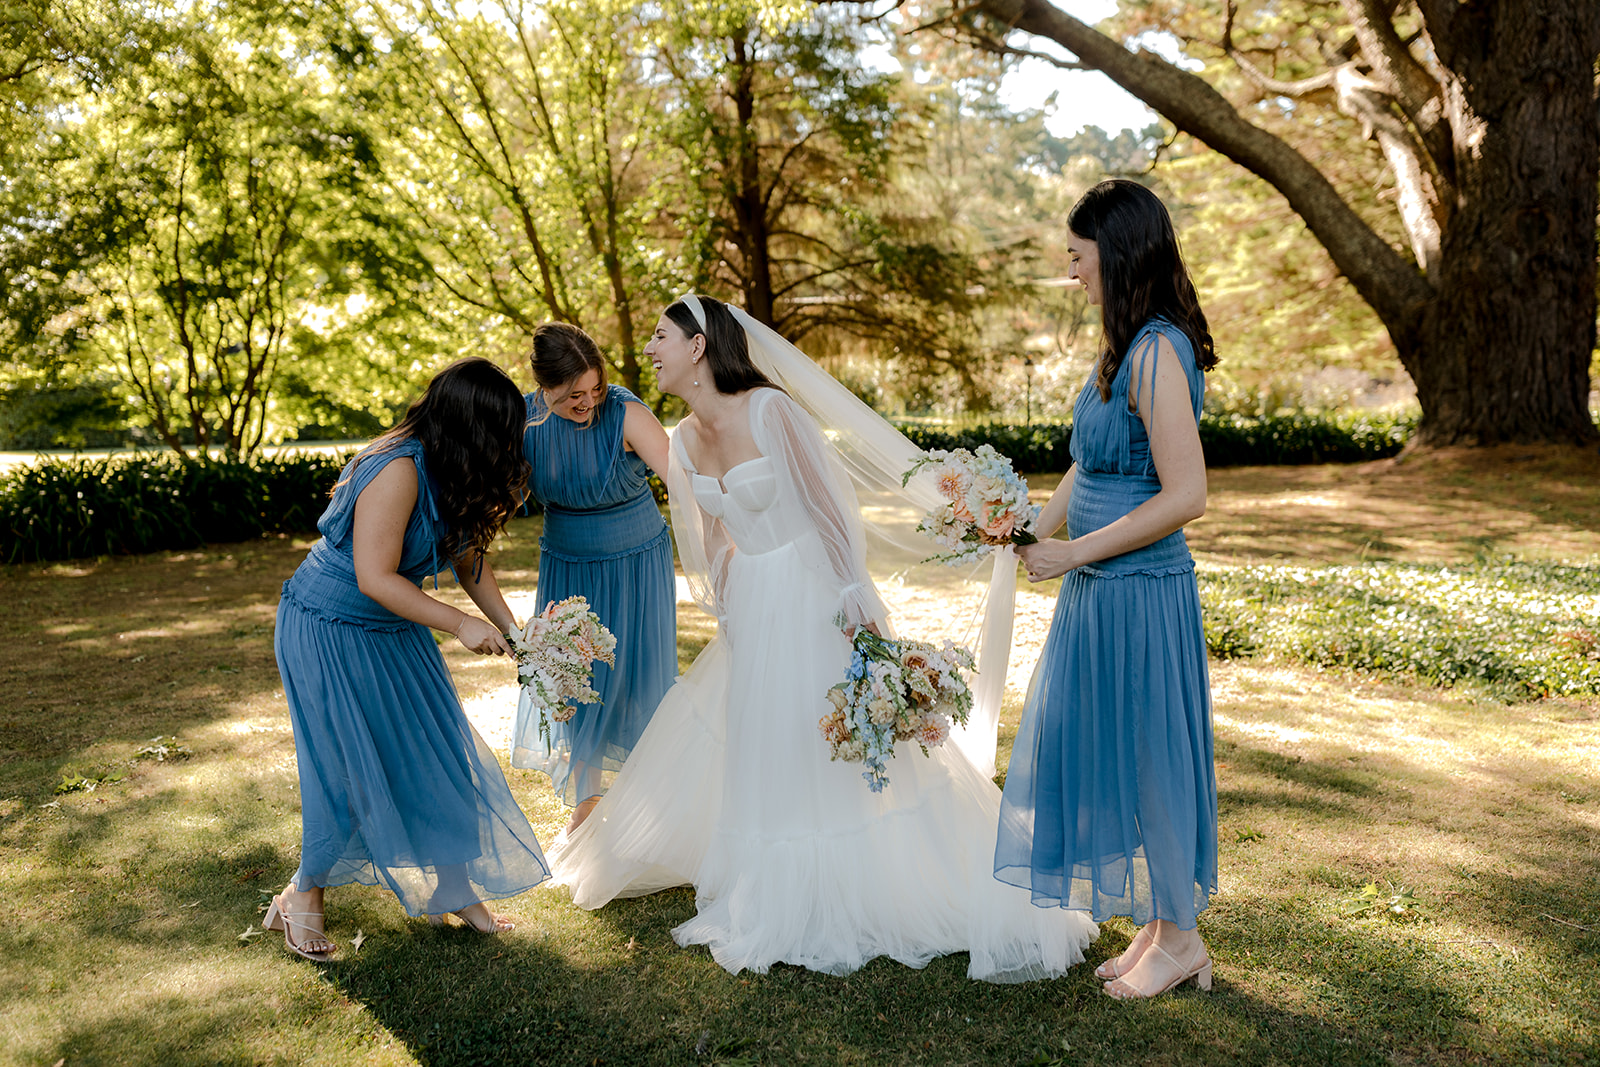 Bride with her bridesmaids holding their bridal bouquets at her elegant country wedding.